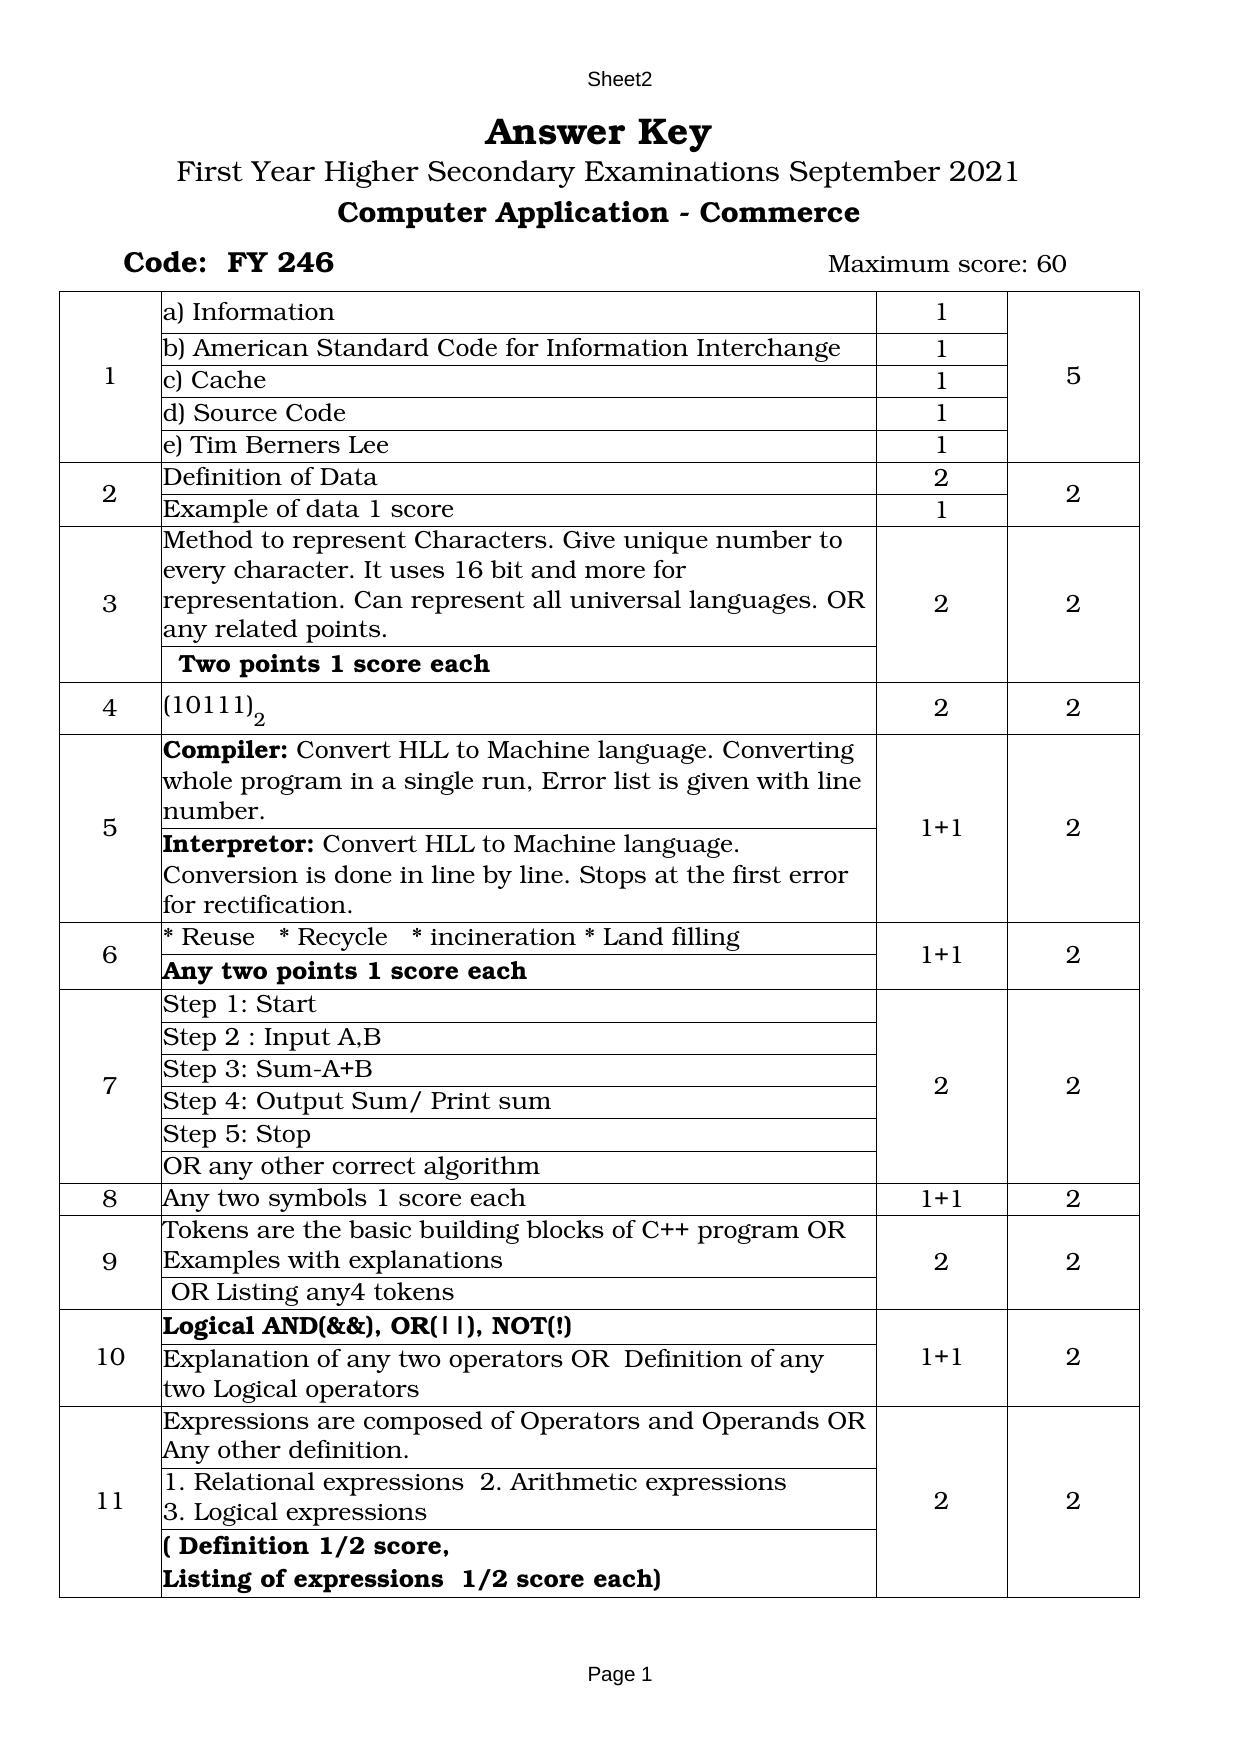 Kerala Plus One (Class 11th) Computer Application-Commerce Answer Key 2021 - Page 1